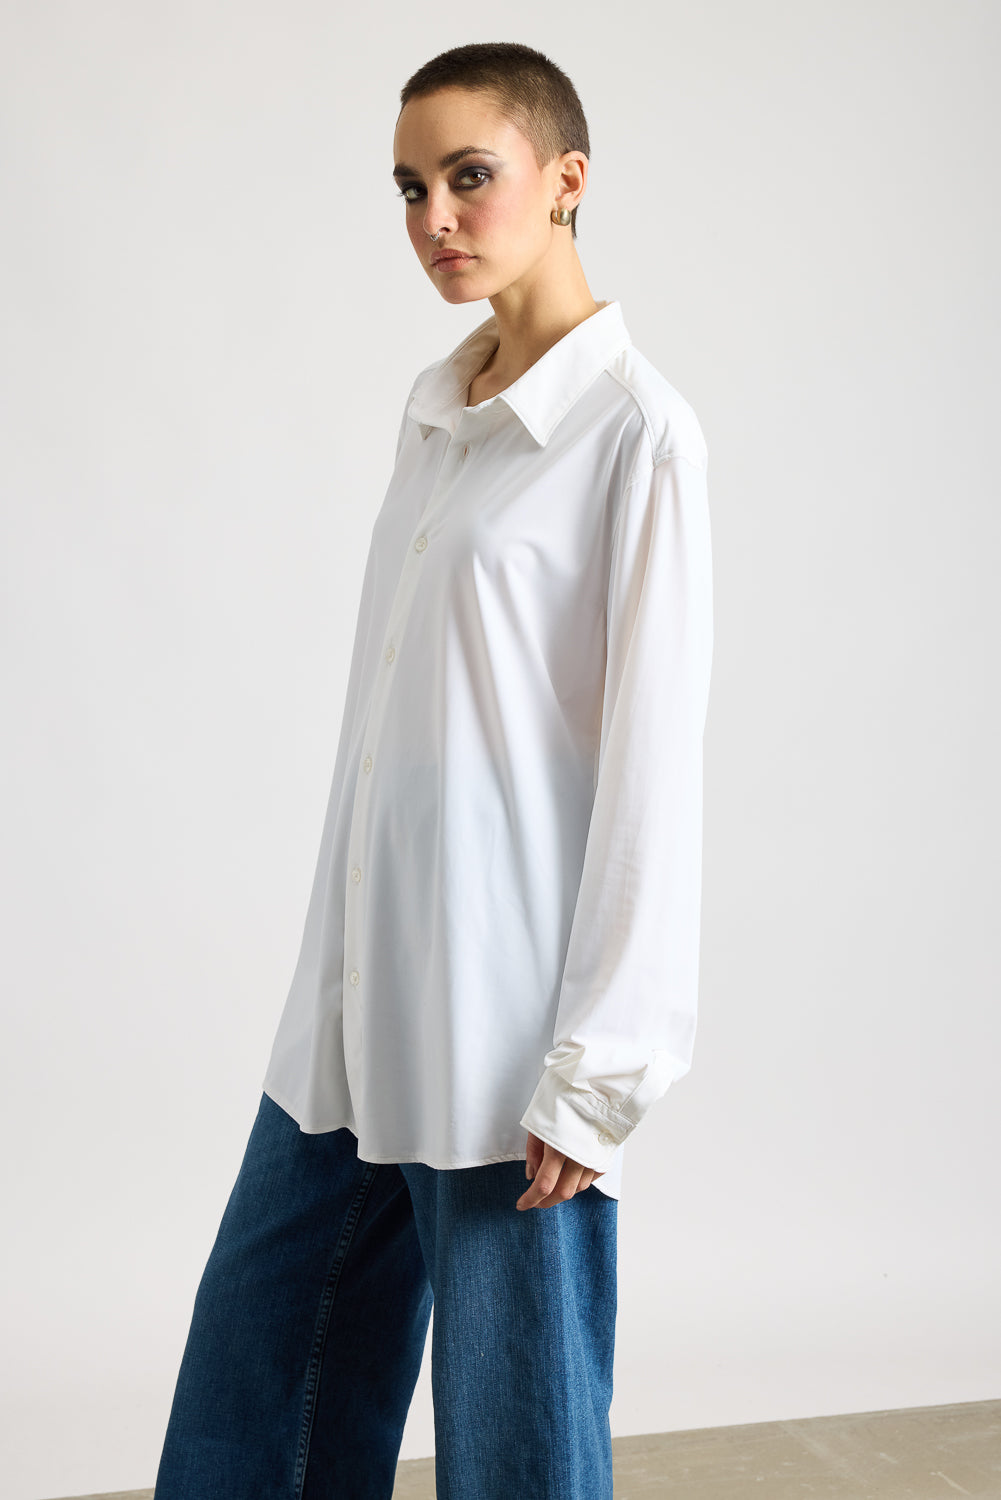 Breezy Relaxed Classic White Shirt